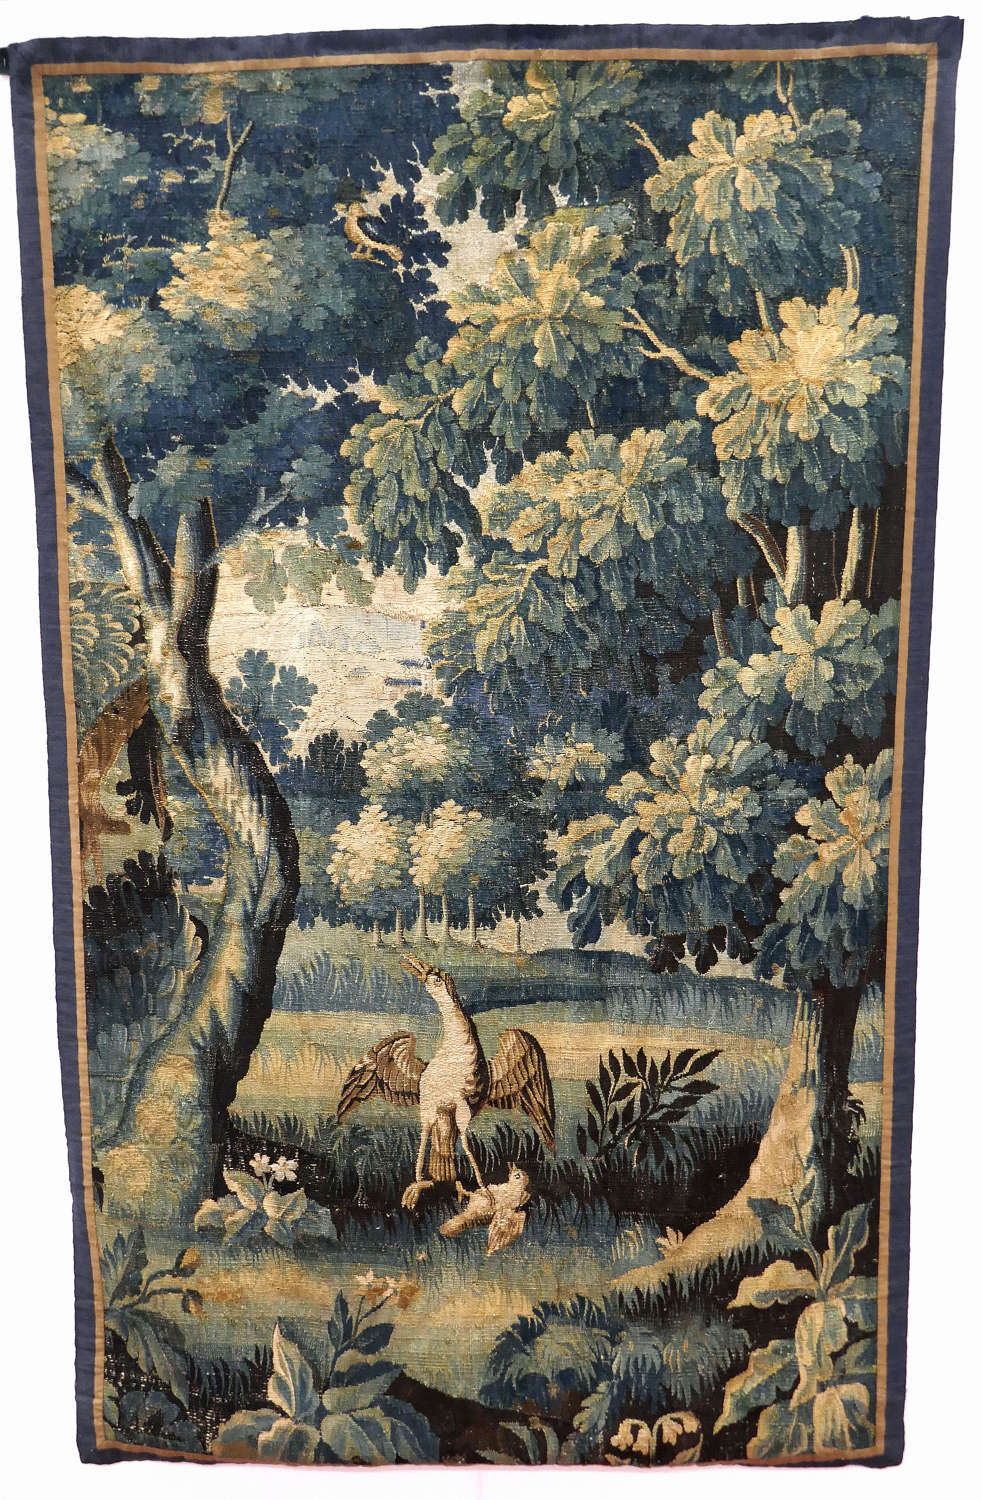 Antique 18thc French Needlework Aubusson Tapestry. French C1740-60.